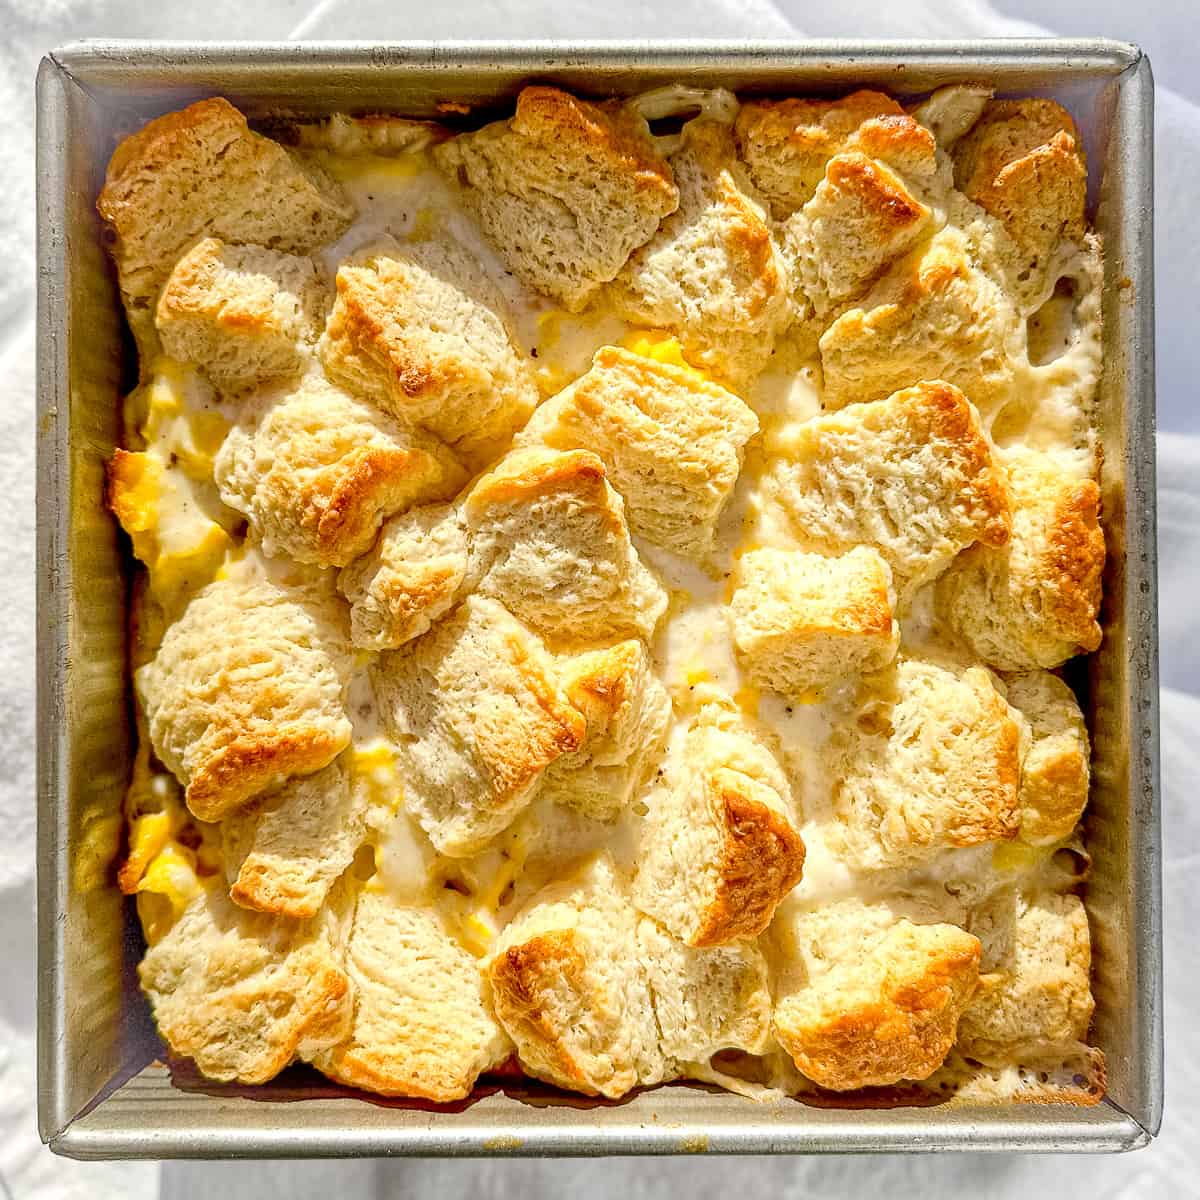 Biscuits and Gravy breakfast casserole topped with homemade buttermilk biscuits.